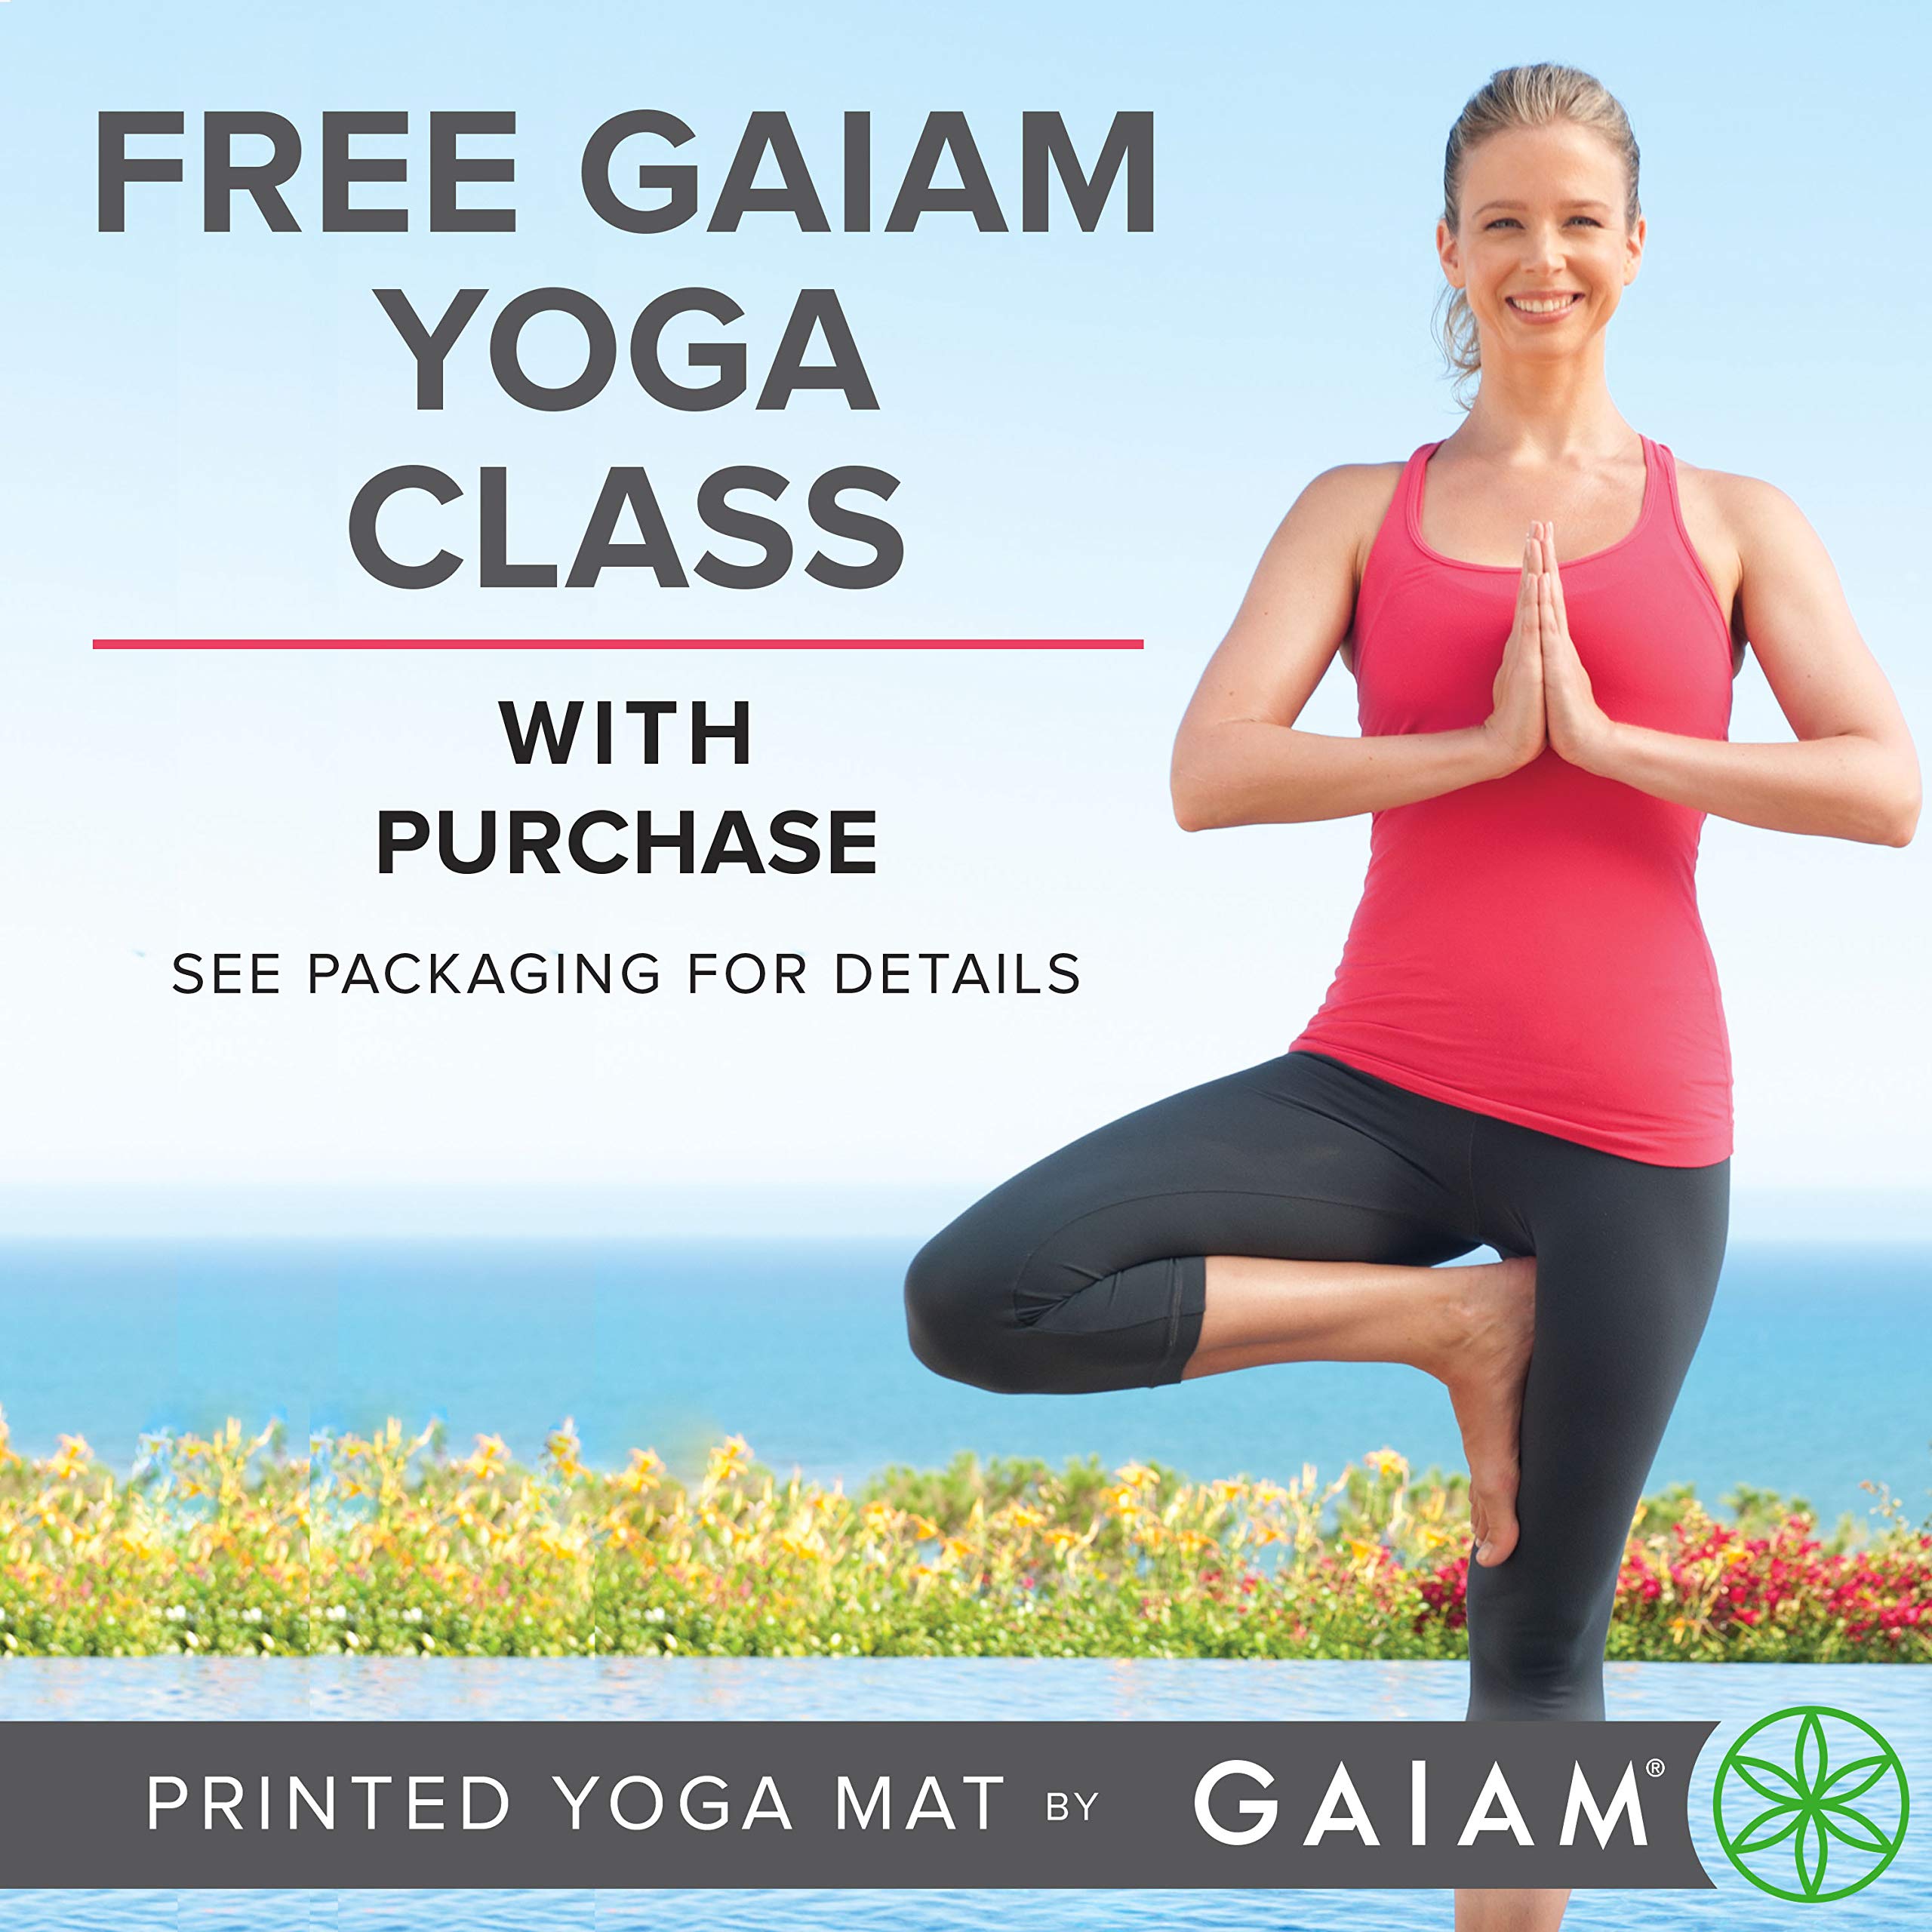 Gaiam Yoga Mat - Premium 6mm Print Reversible Extra Thick Non Slip Exercise & Fitness Mat for All Types of Yoga, Pilates & Floor Workouts (68